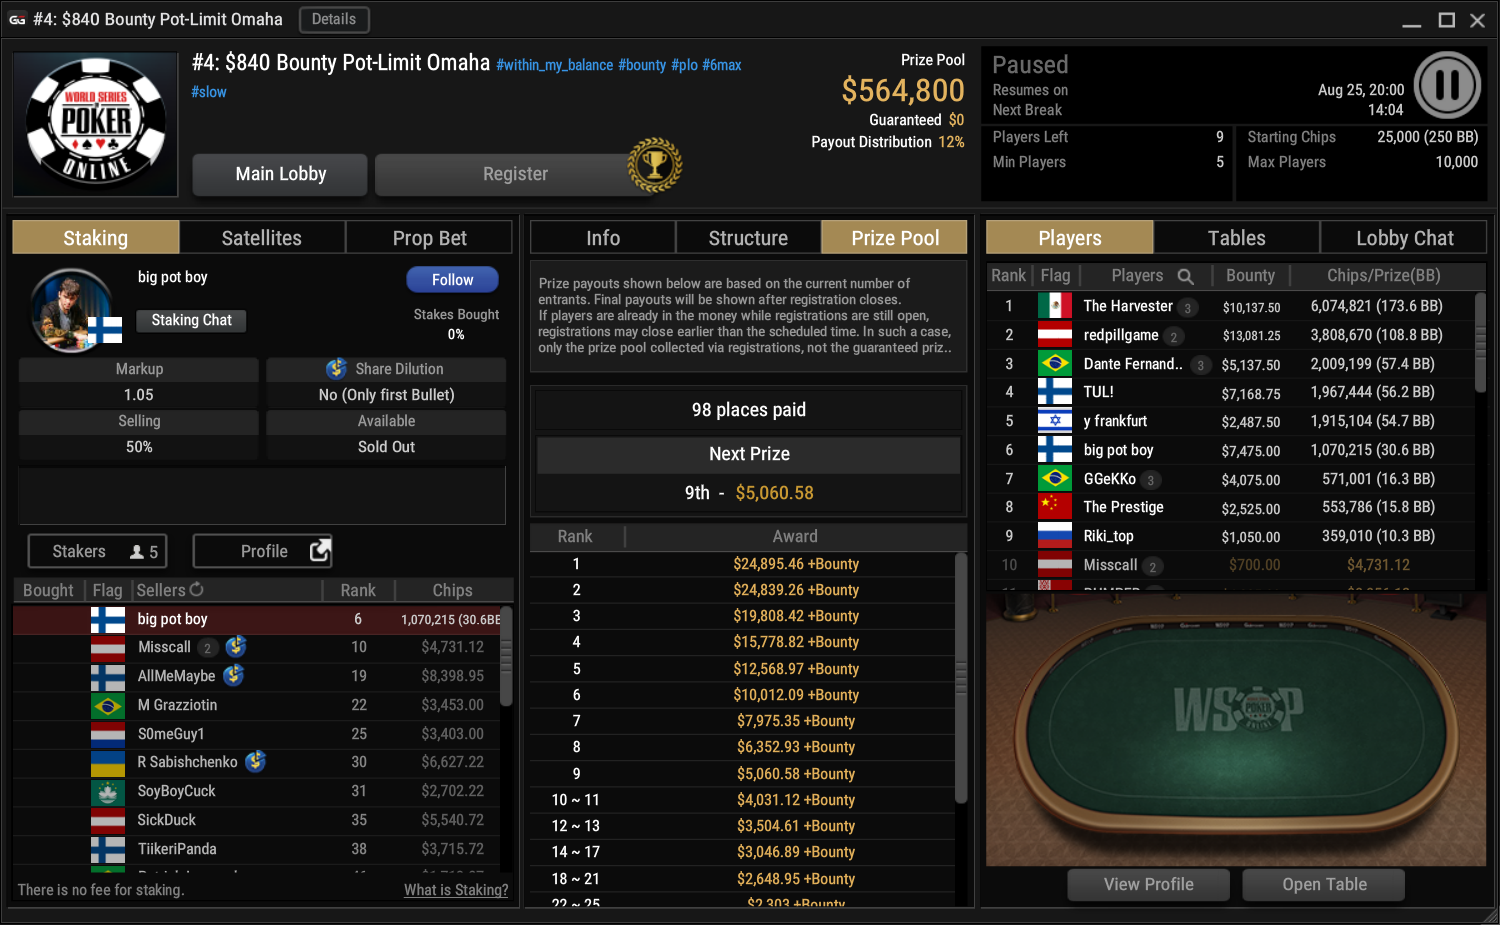 GGPoker WSOP Online: Strong DACHs with a good record